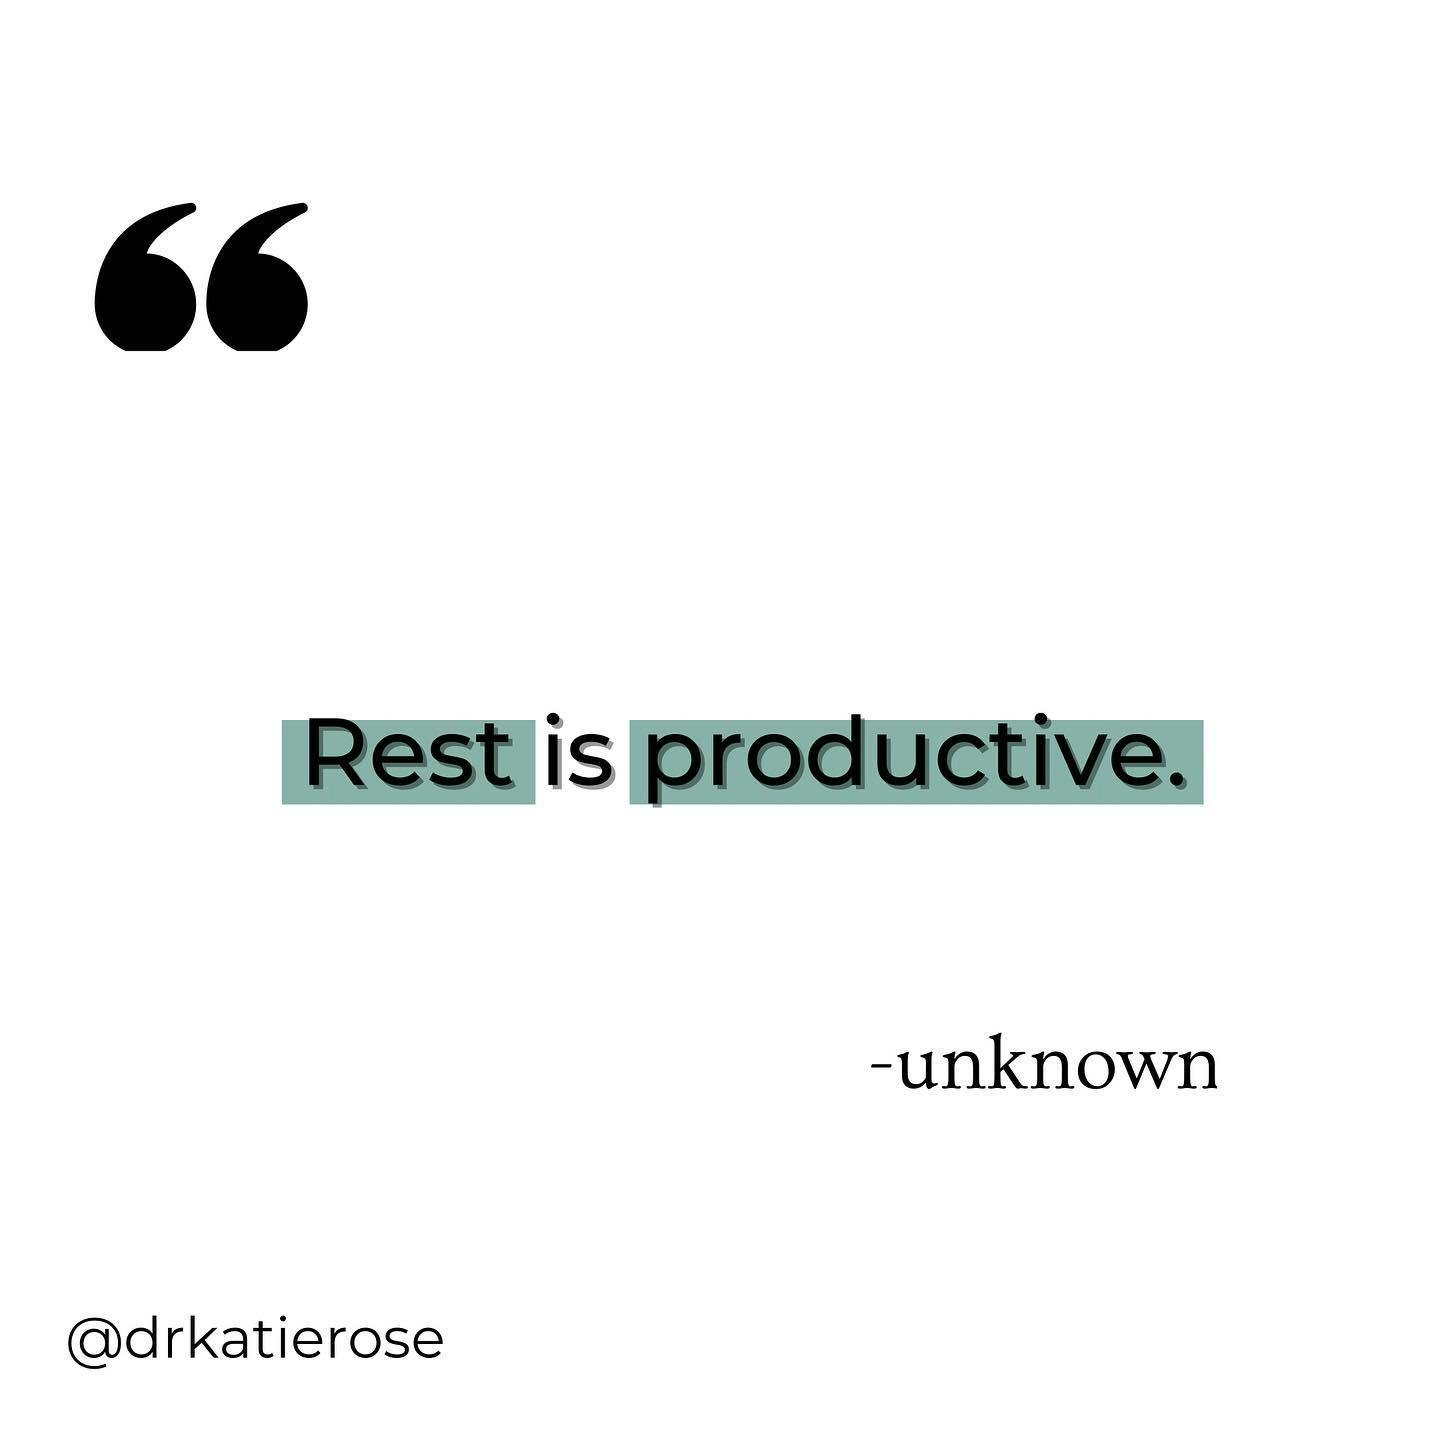 Do we really need to say more?

Sometime, when I feel like it, I’ll share more about what breakthrough 🦠has been like. 

For now, I will rest. 

#restisproductive #restisbest